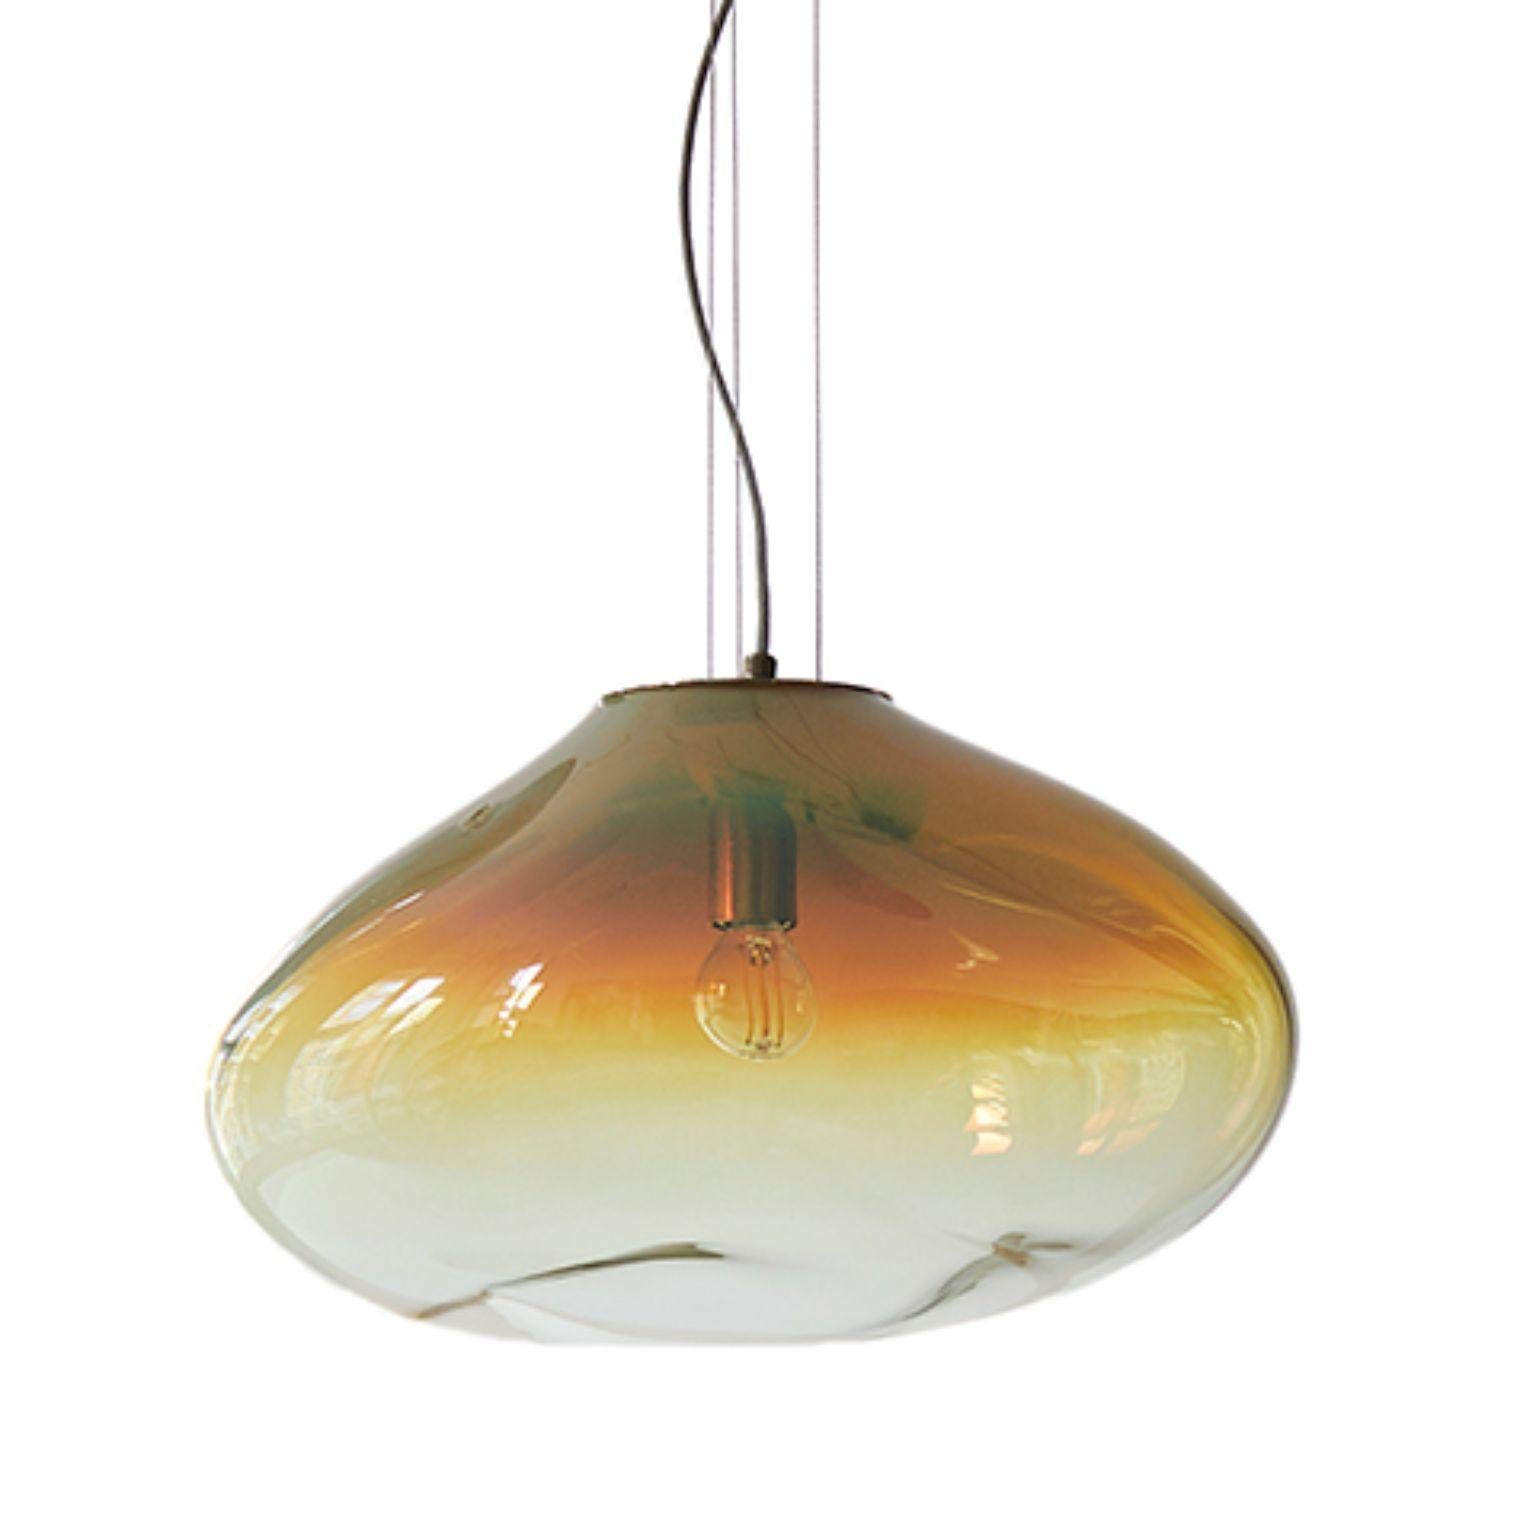 Haumea amorph amber iridescent XL pendant by ELOA.
No UL listed 
Material: glass, steel, silver, LED bulb
Dimensions: D 35 x W 47 x H 32 cm.
Also available in different colors and dimensions.

All our lamps can be wired according to each country. If